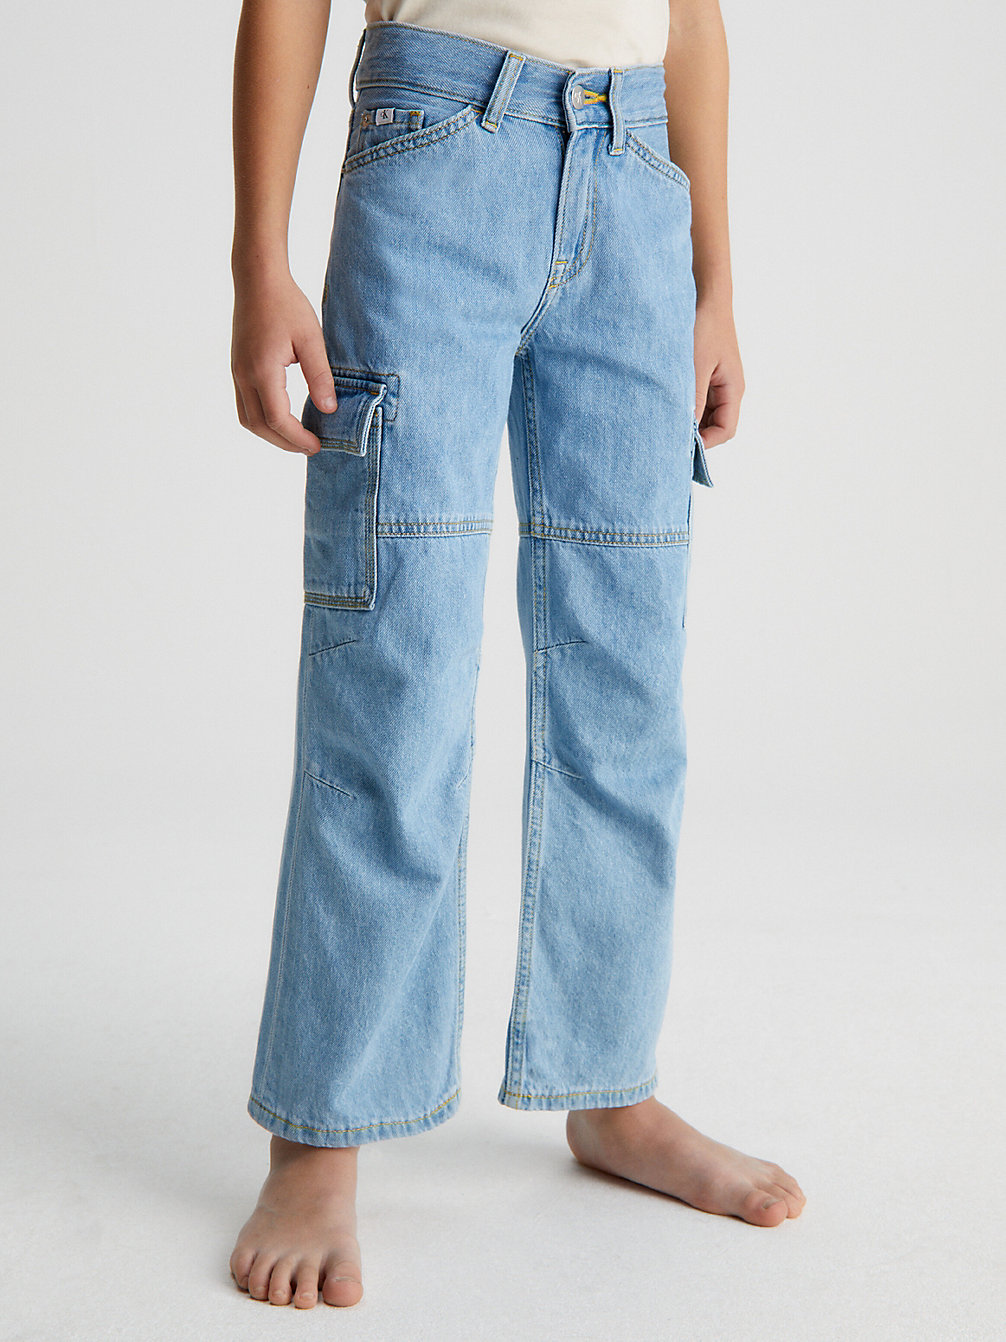 Jean Skater Relaxed > UTILITY WASHED BLUE > undefined boys > Calvin Klein